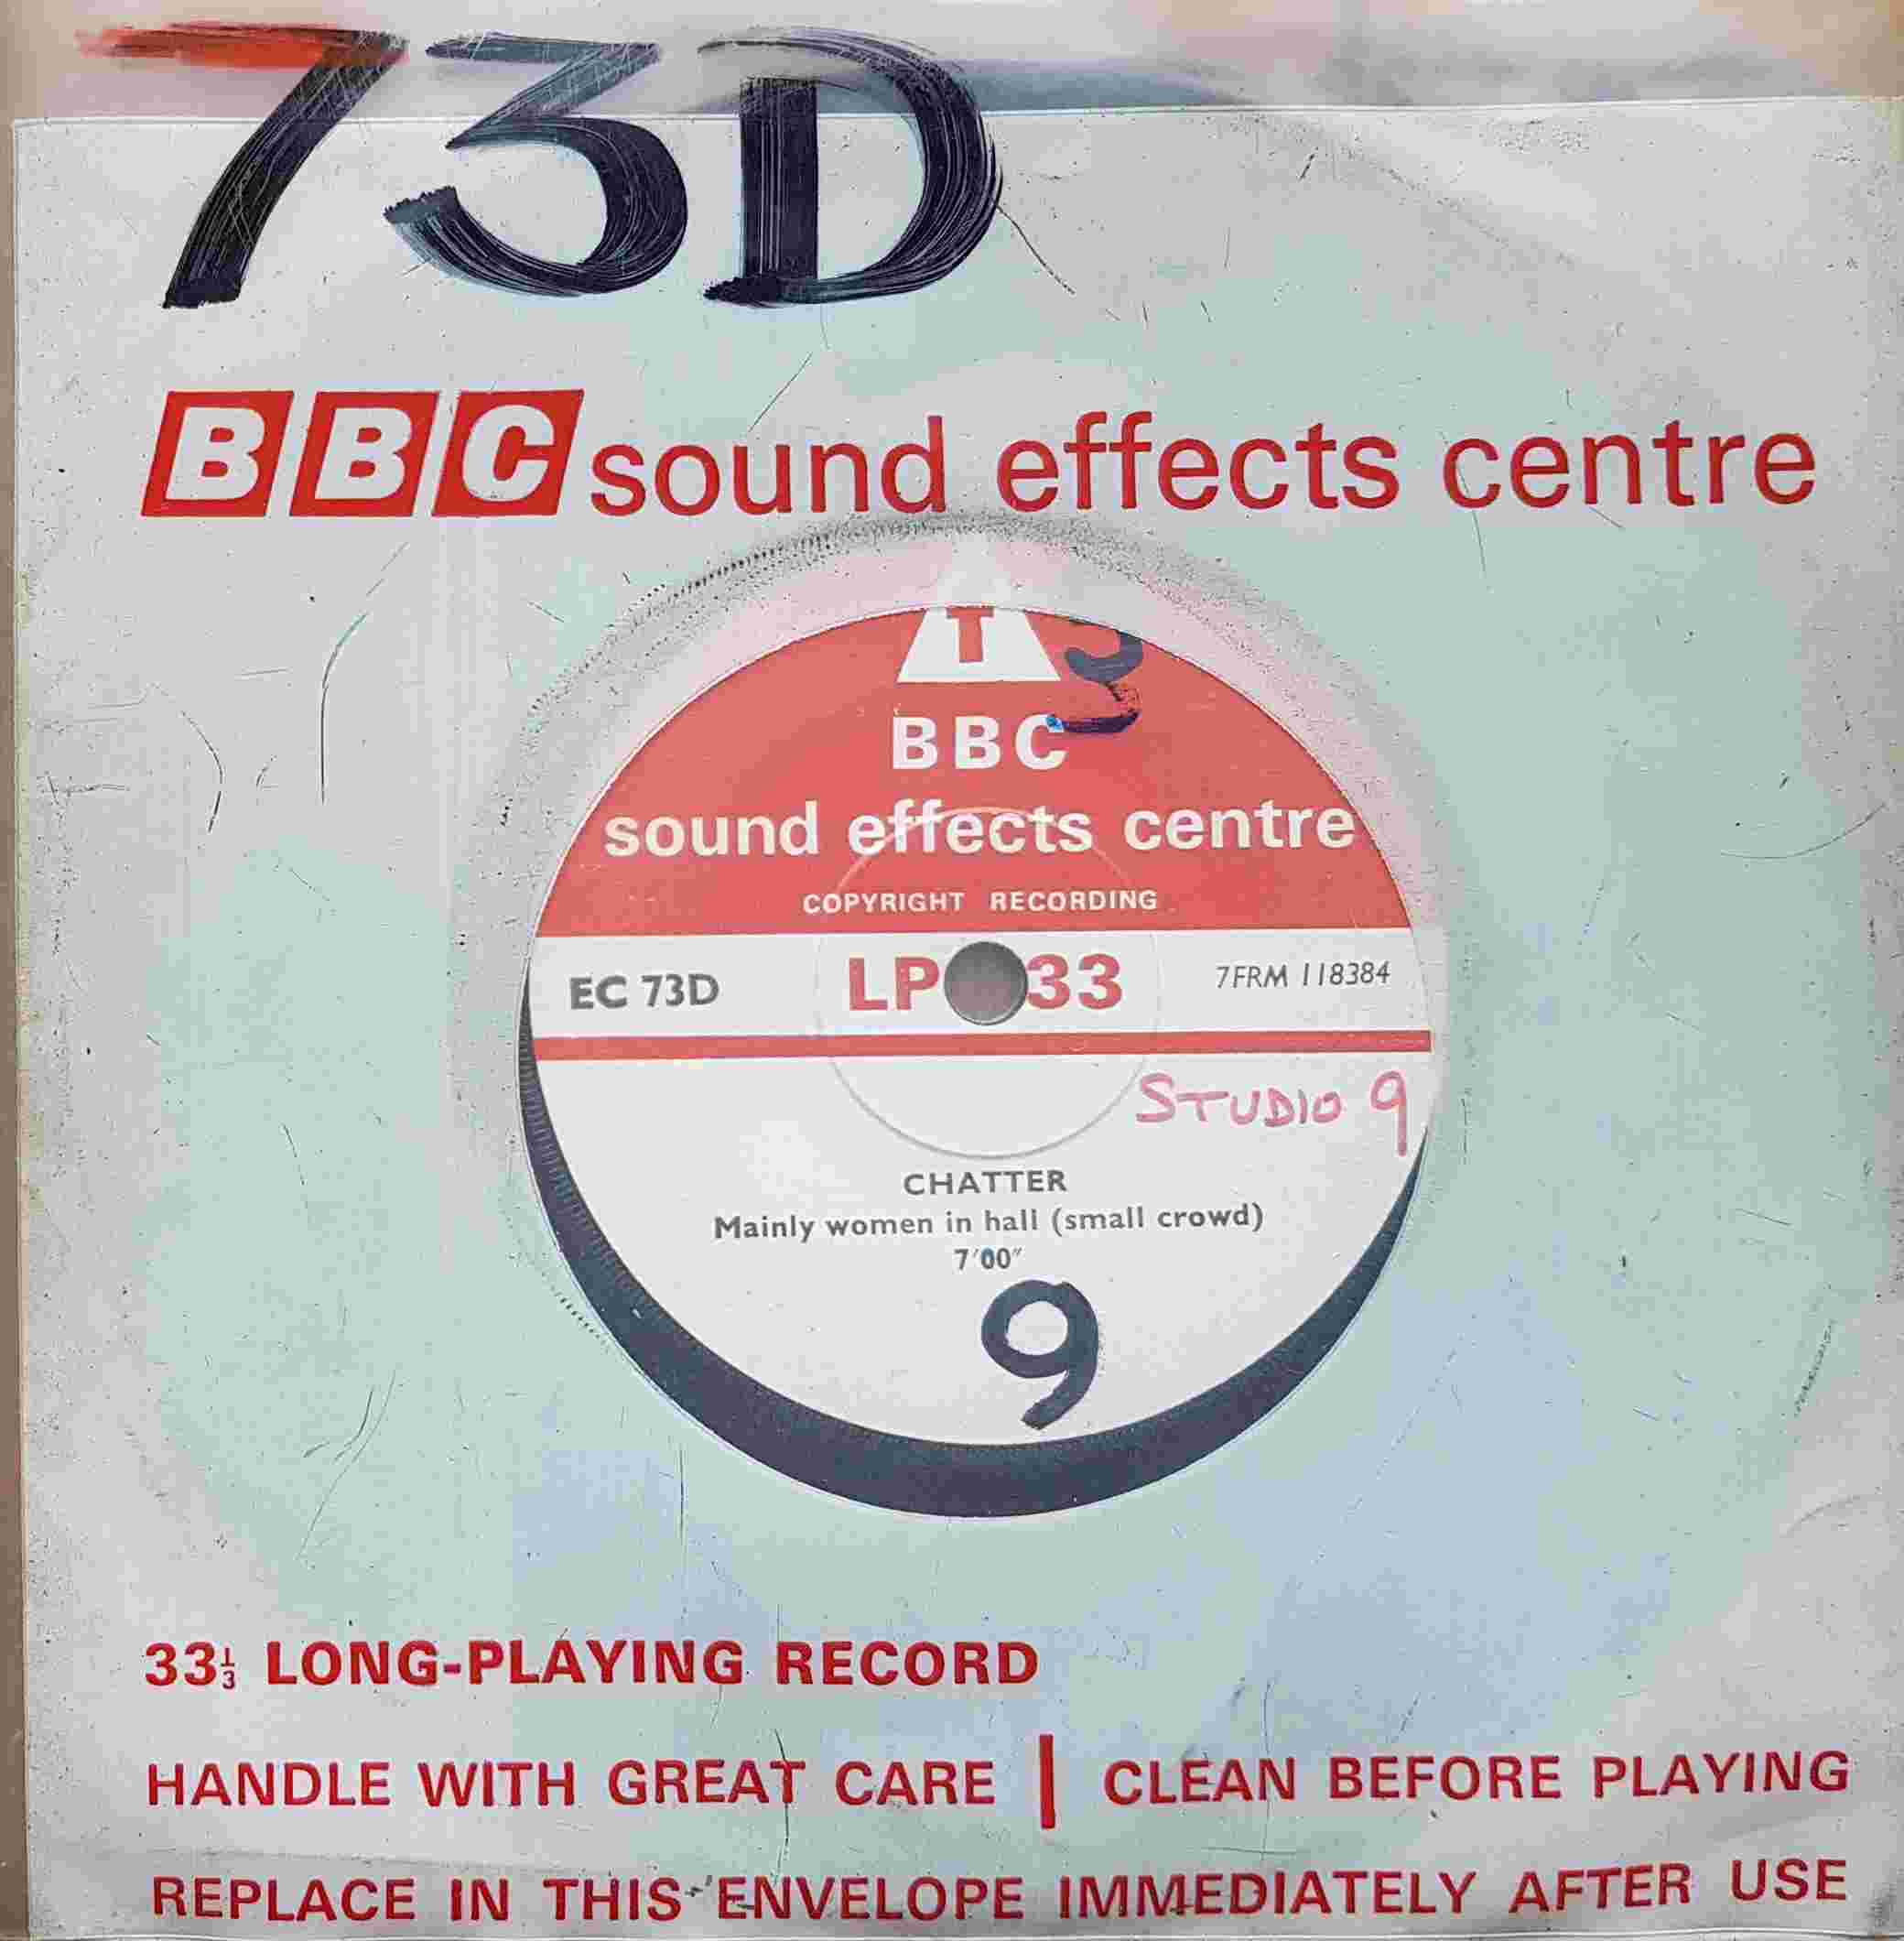 Picture of EC 73D Chatter by artist Not registered from the BBC singles - Records and Tapes library